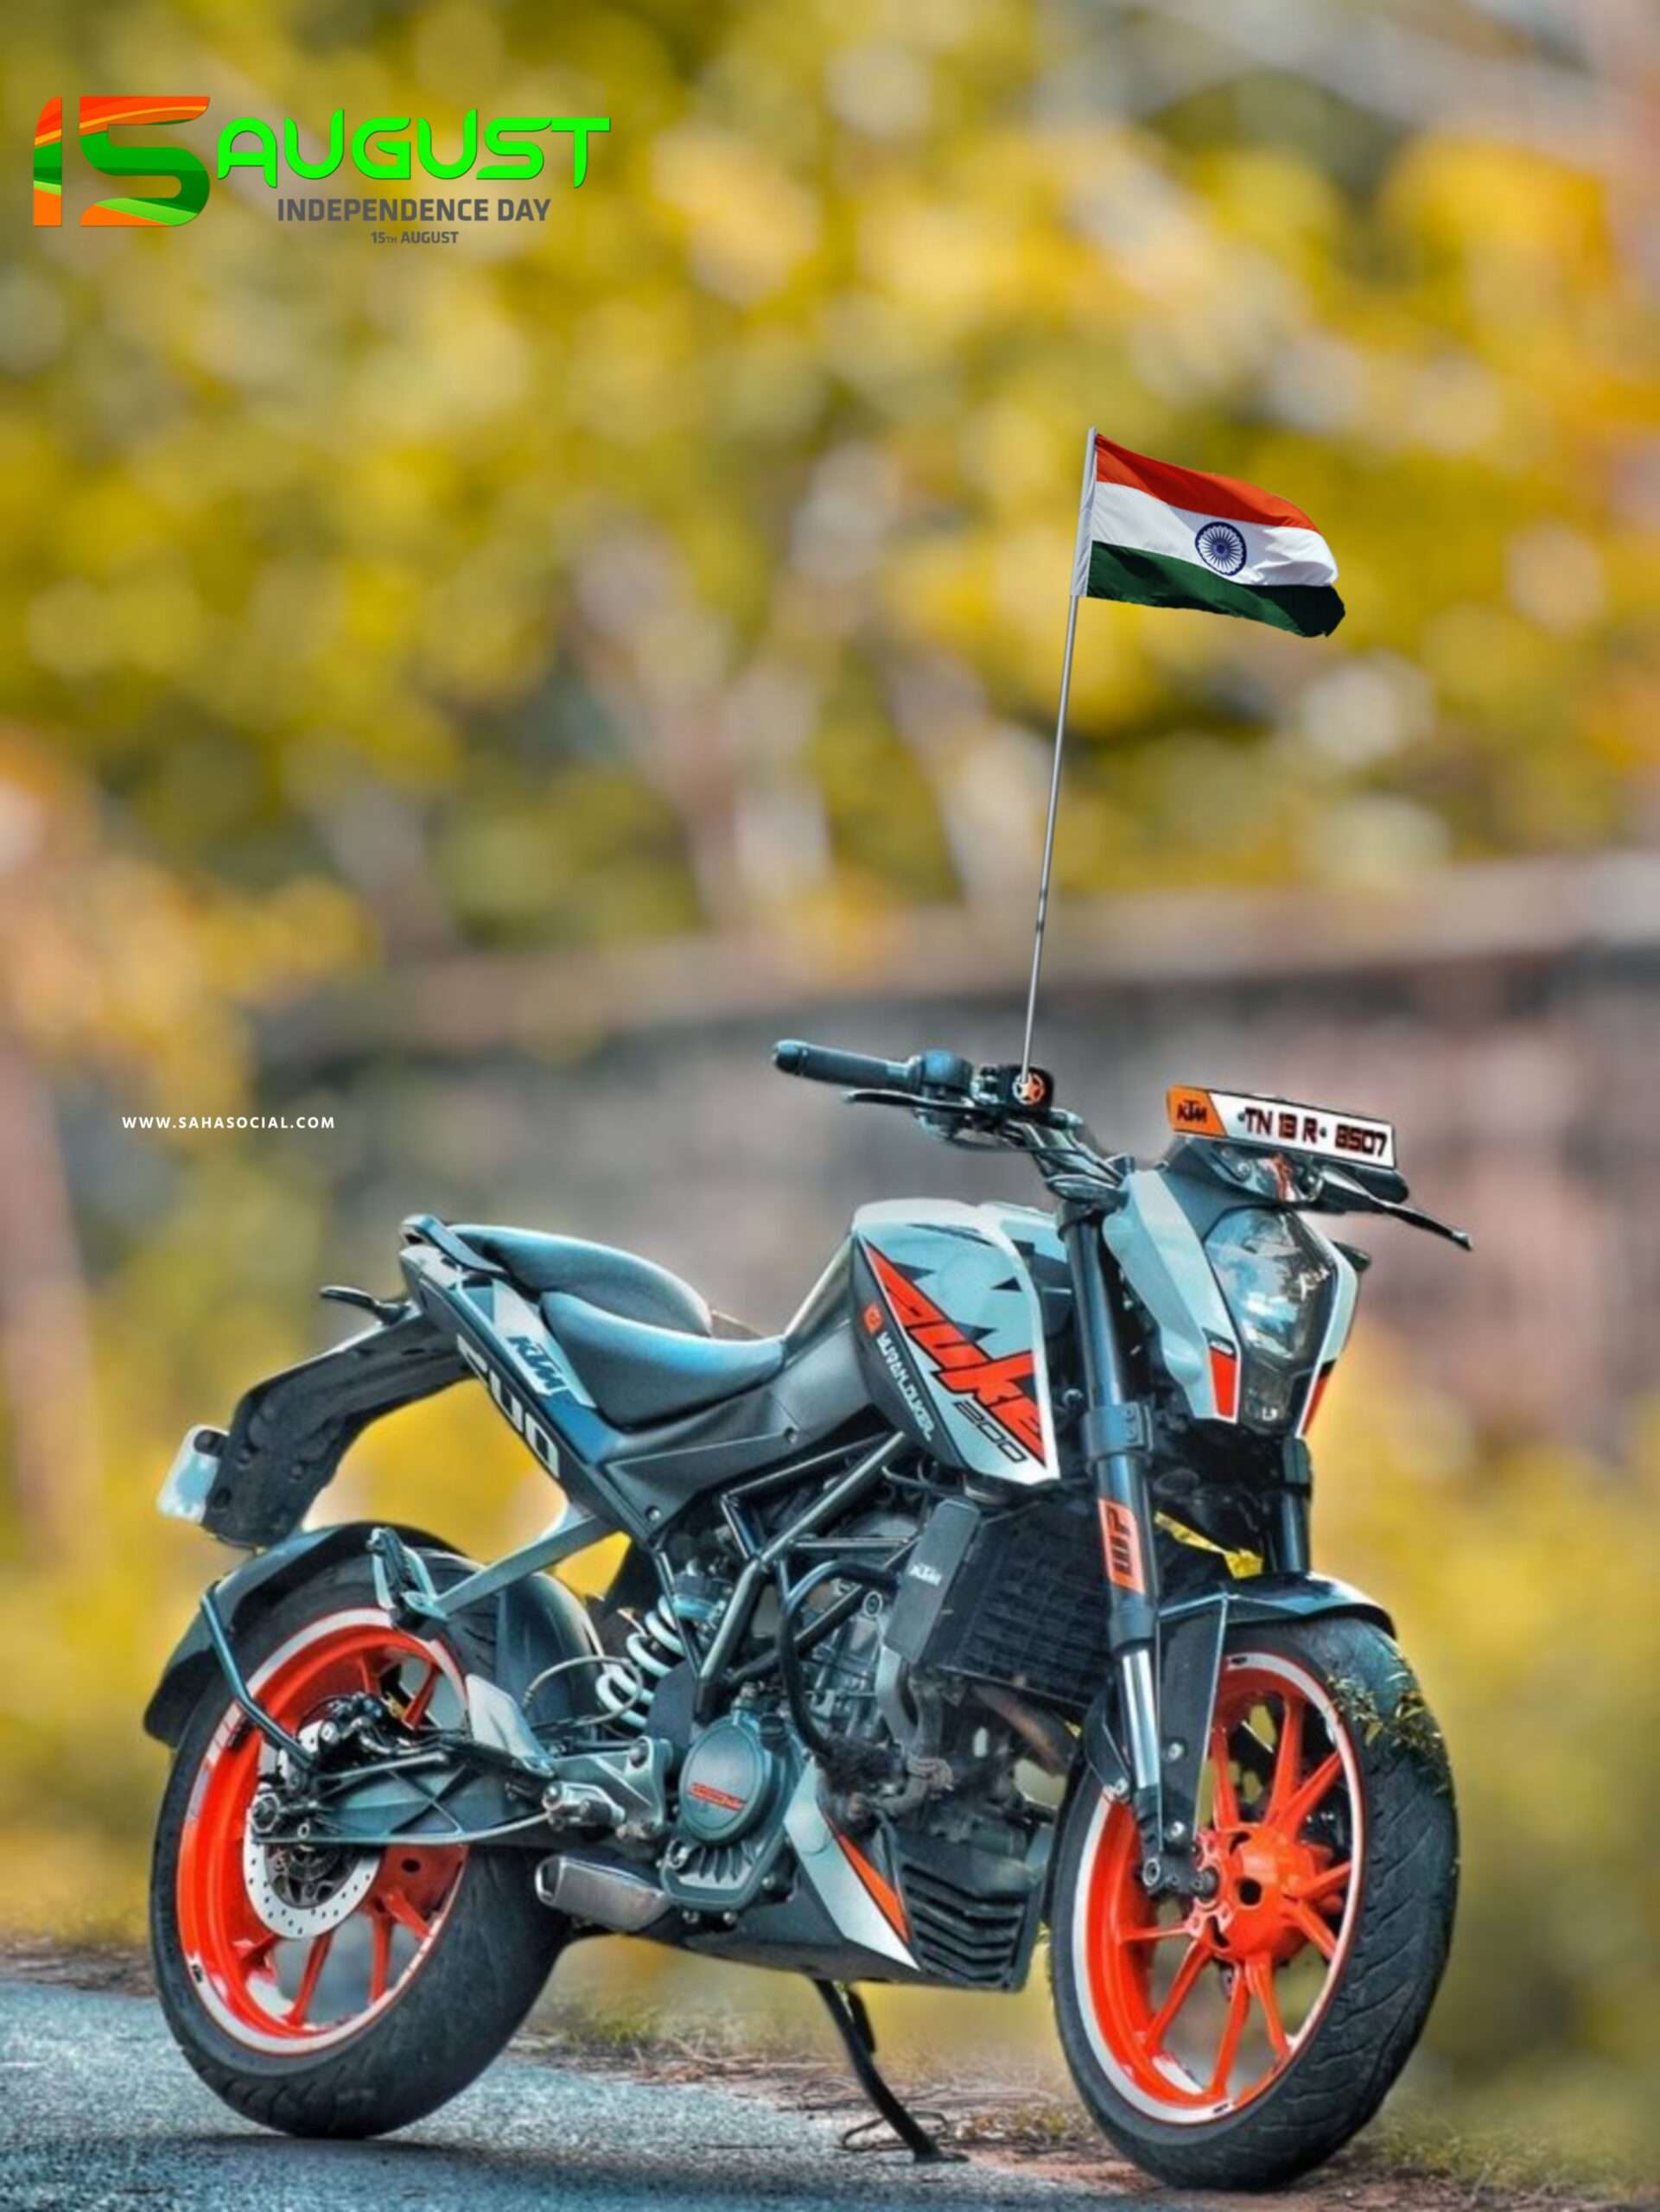 Bike pose with Indian flag,bike with Indian flag background for Photo Editing